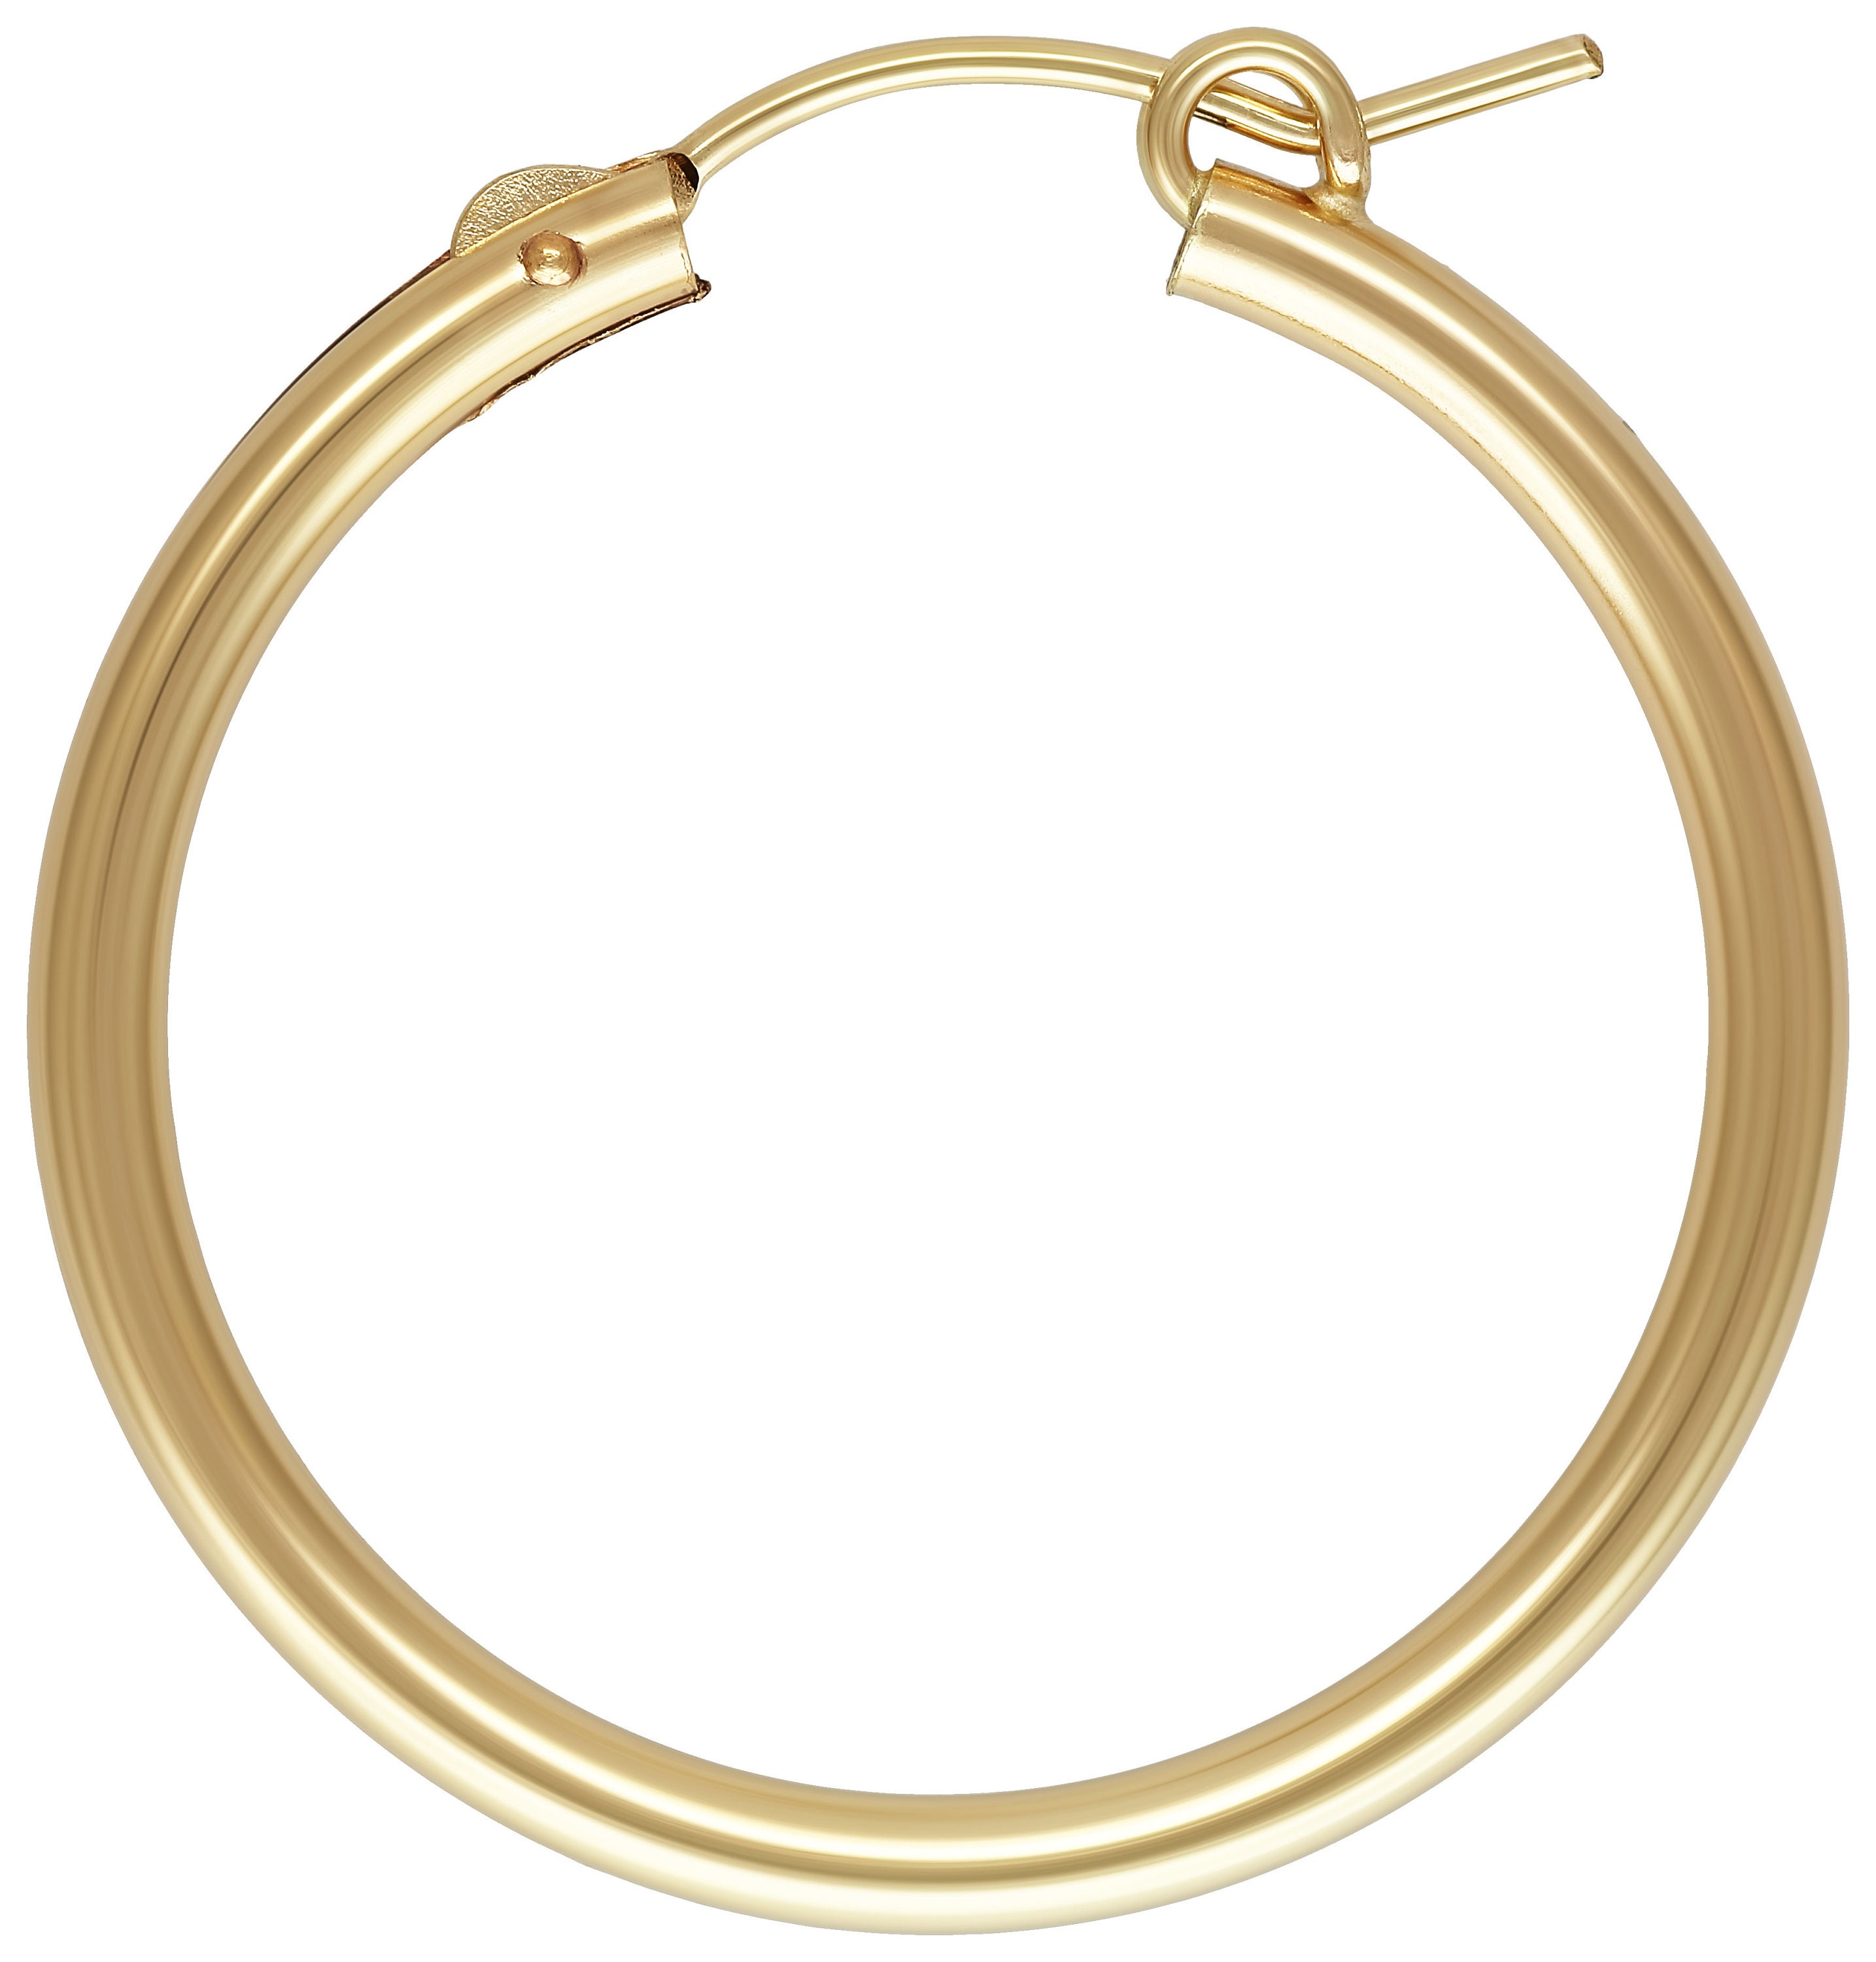 2.3x29.0mm Eurowire Hoop, 14k gold filled. Made in USA. #4011529